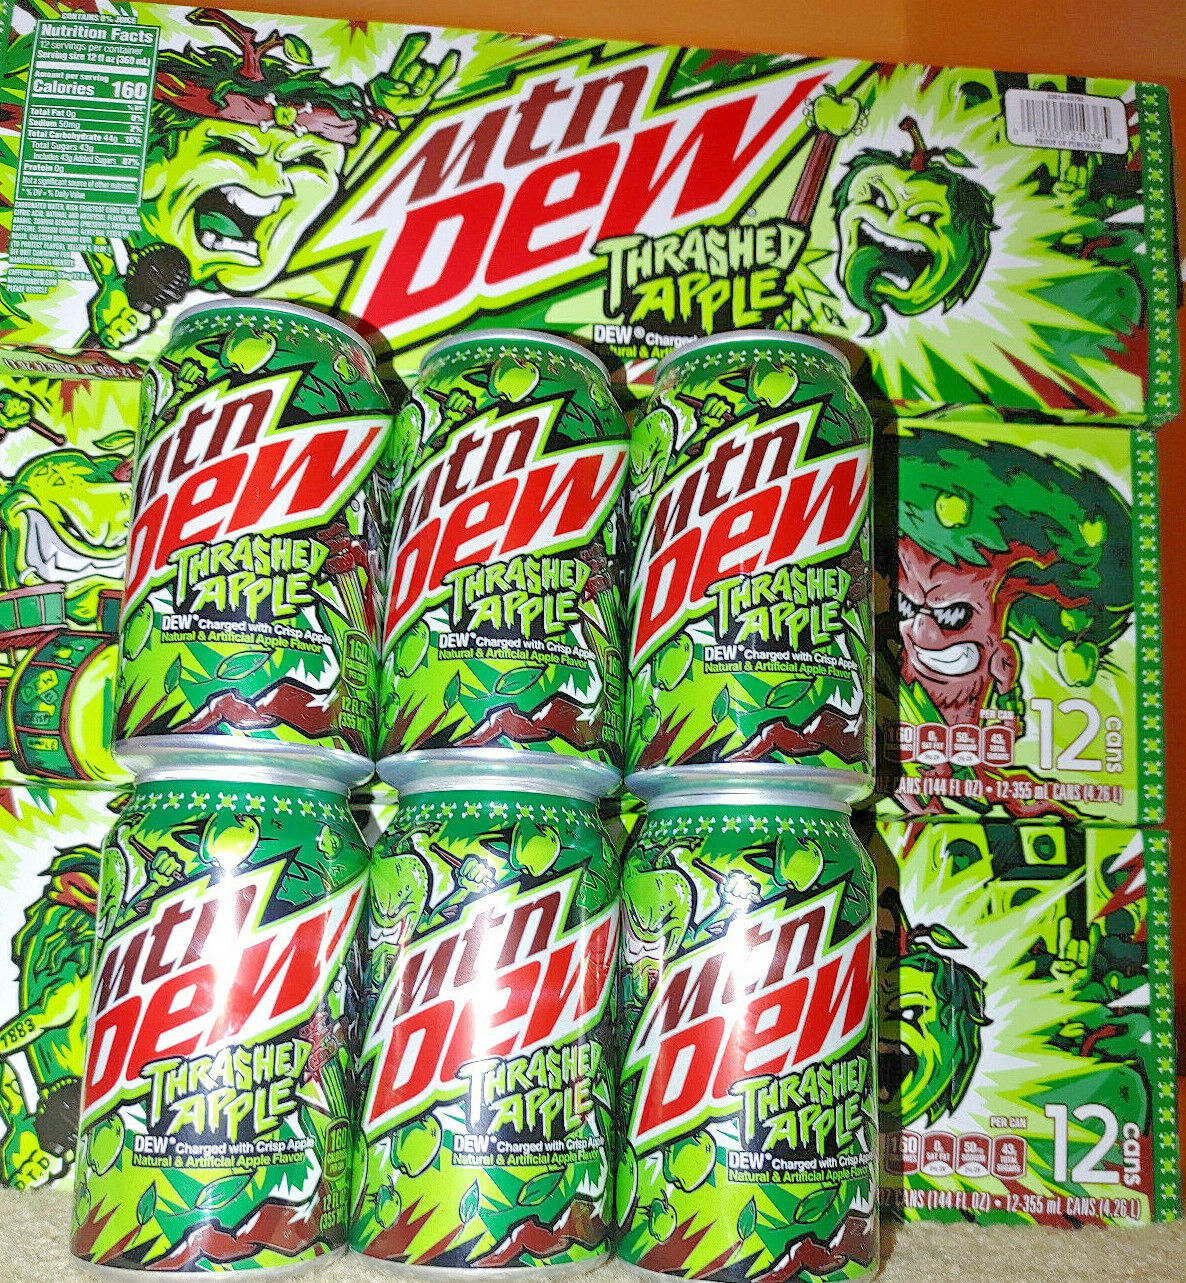 THRASH with NEW Mountain Dew Thrashed Apple. (3 pack of SINGLE CANS) Free Ship! Mountain Dew - фотография #3